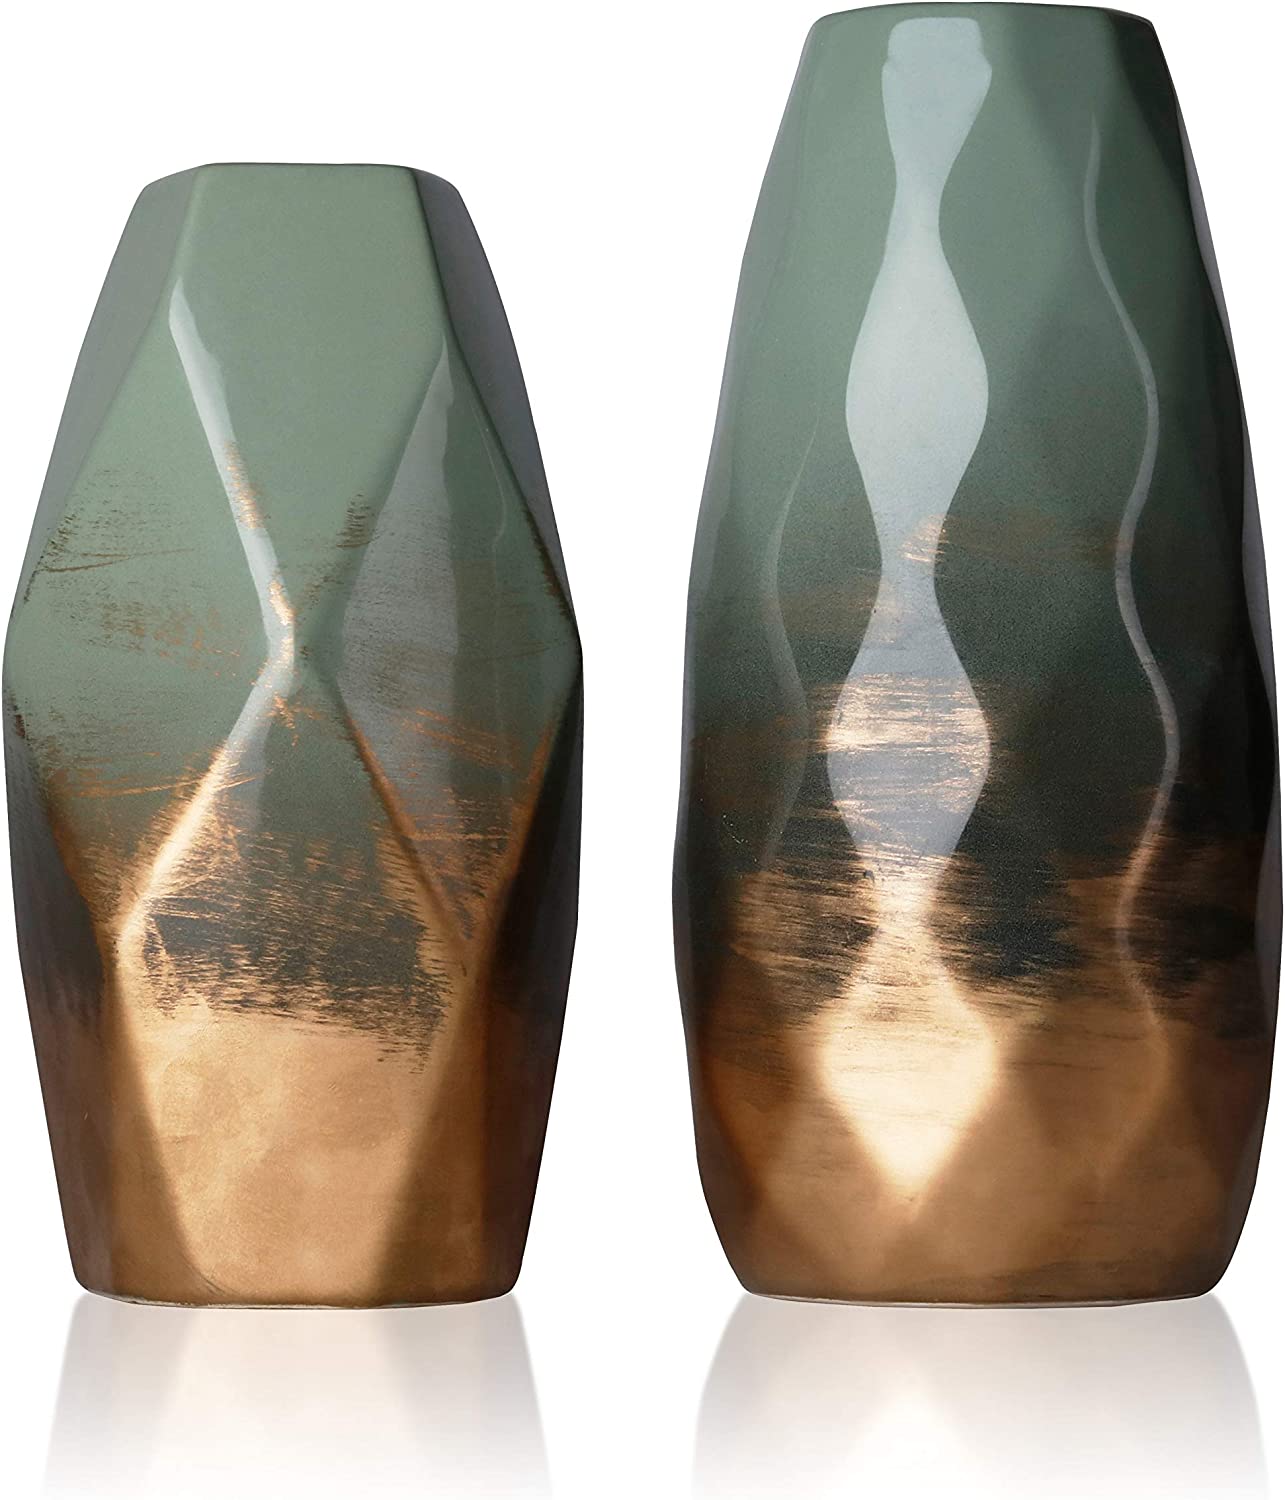 Modern Ceramic Vases Set of 2, Green and Gold Decorative Vase for Home Decor, Geometric 7.9'' &amp; 9.3'' Tall - Home Decor Gifts and More